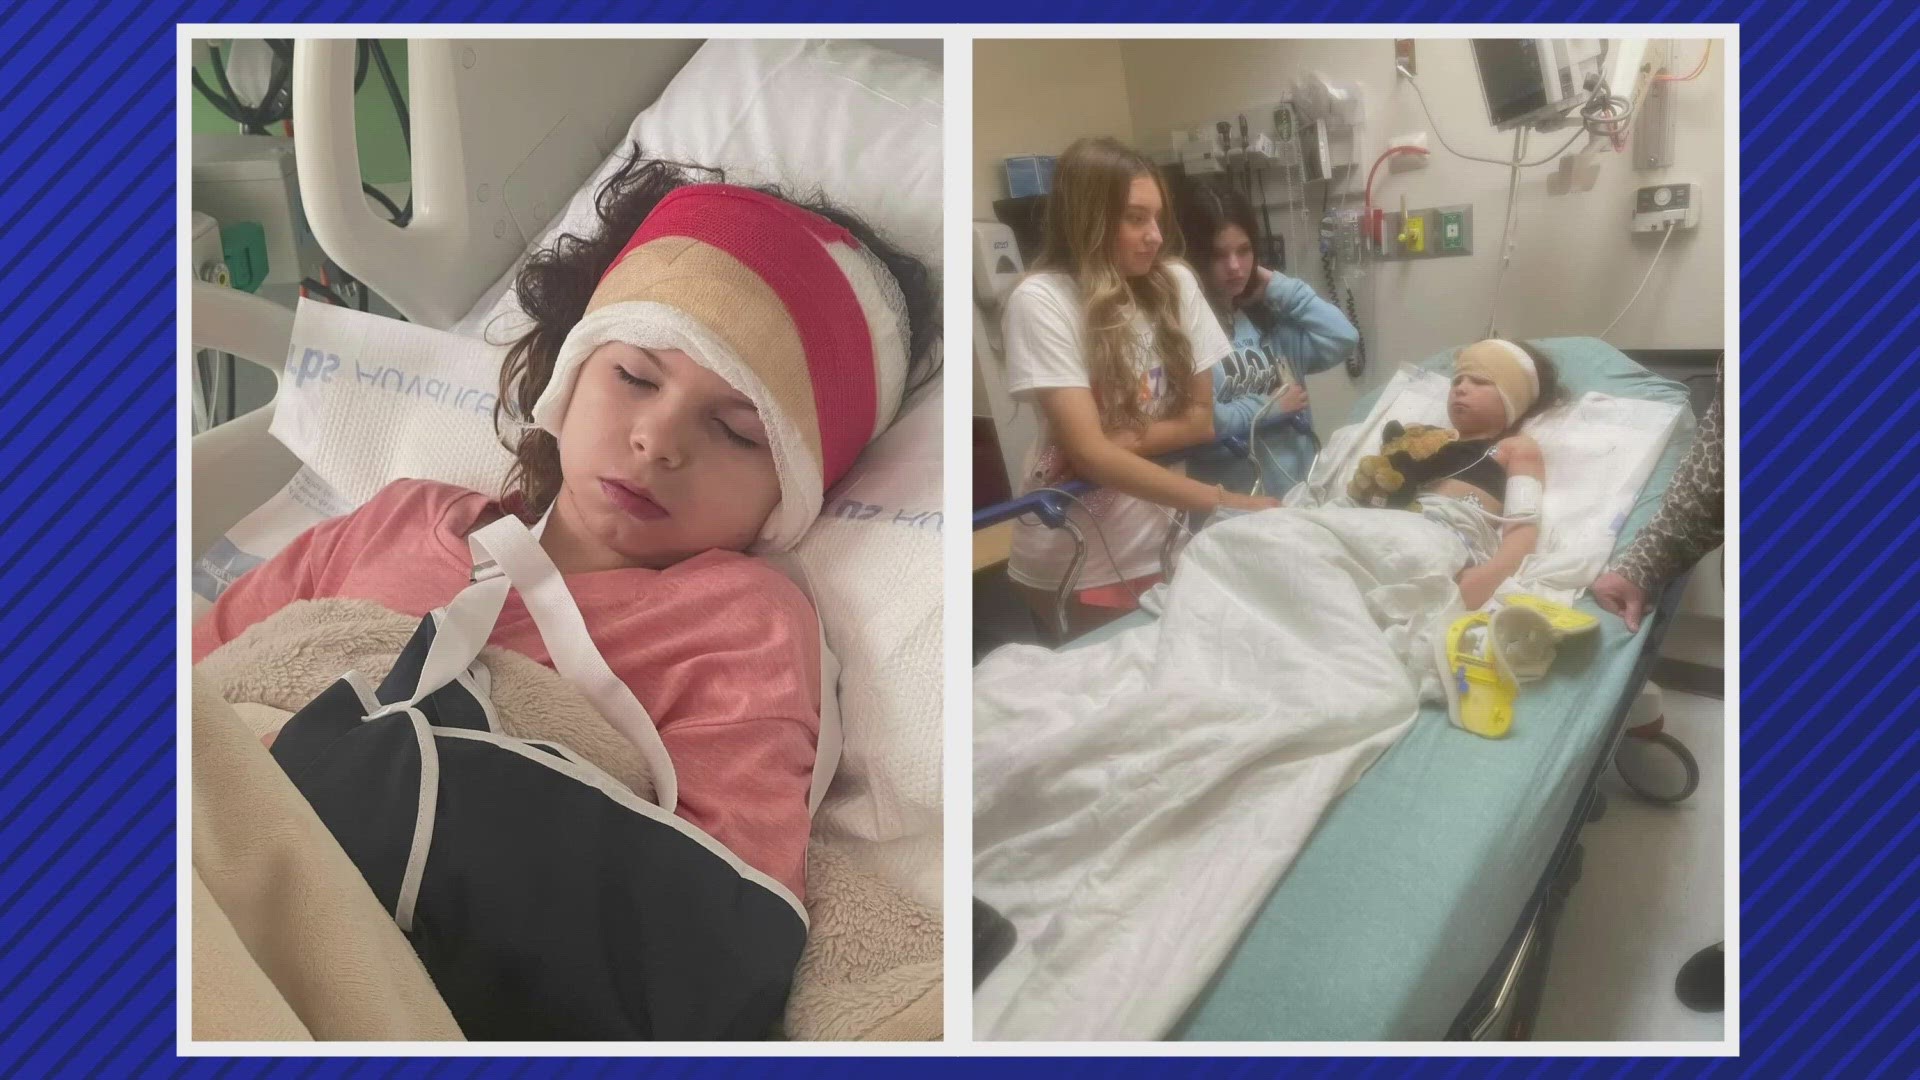 A 9-year-old cheerleader from Midlothian was hurt in an attack by carjackers in Louisiana.